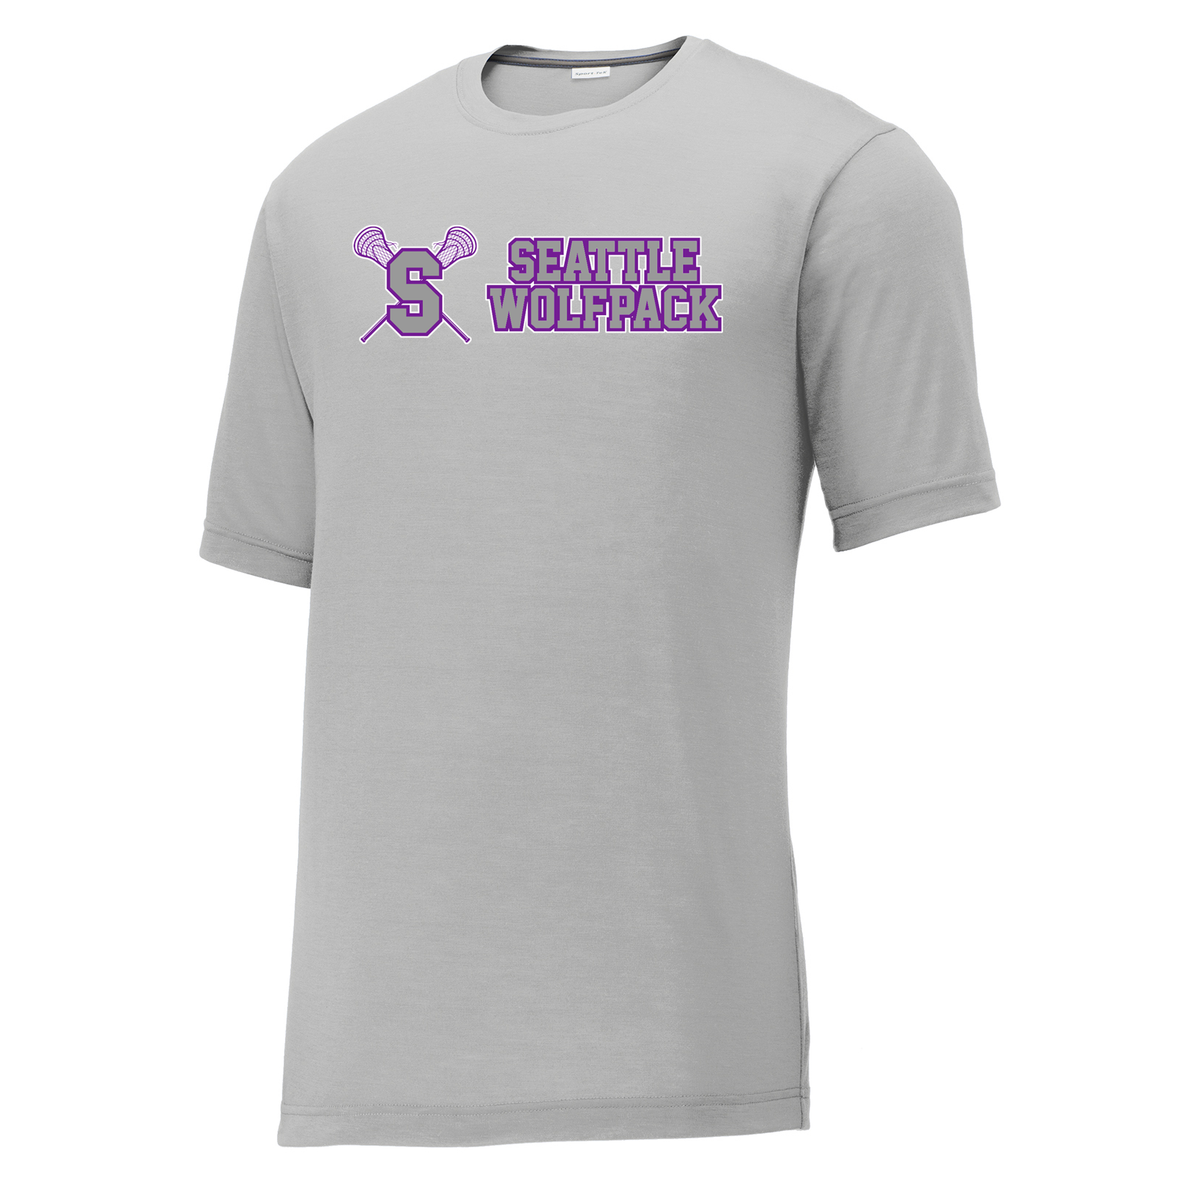 Seattle Wolfpack CottonTouch Performance T-Shirt